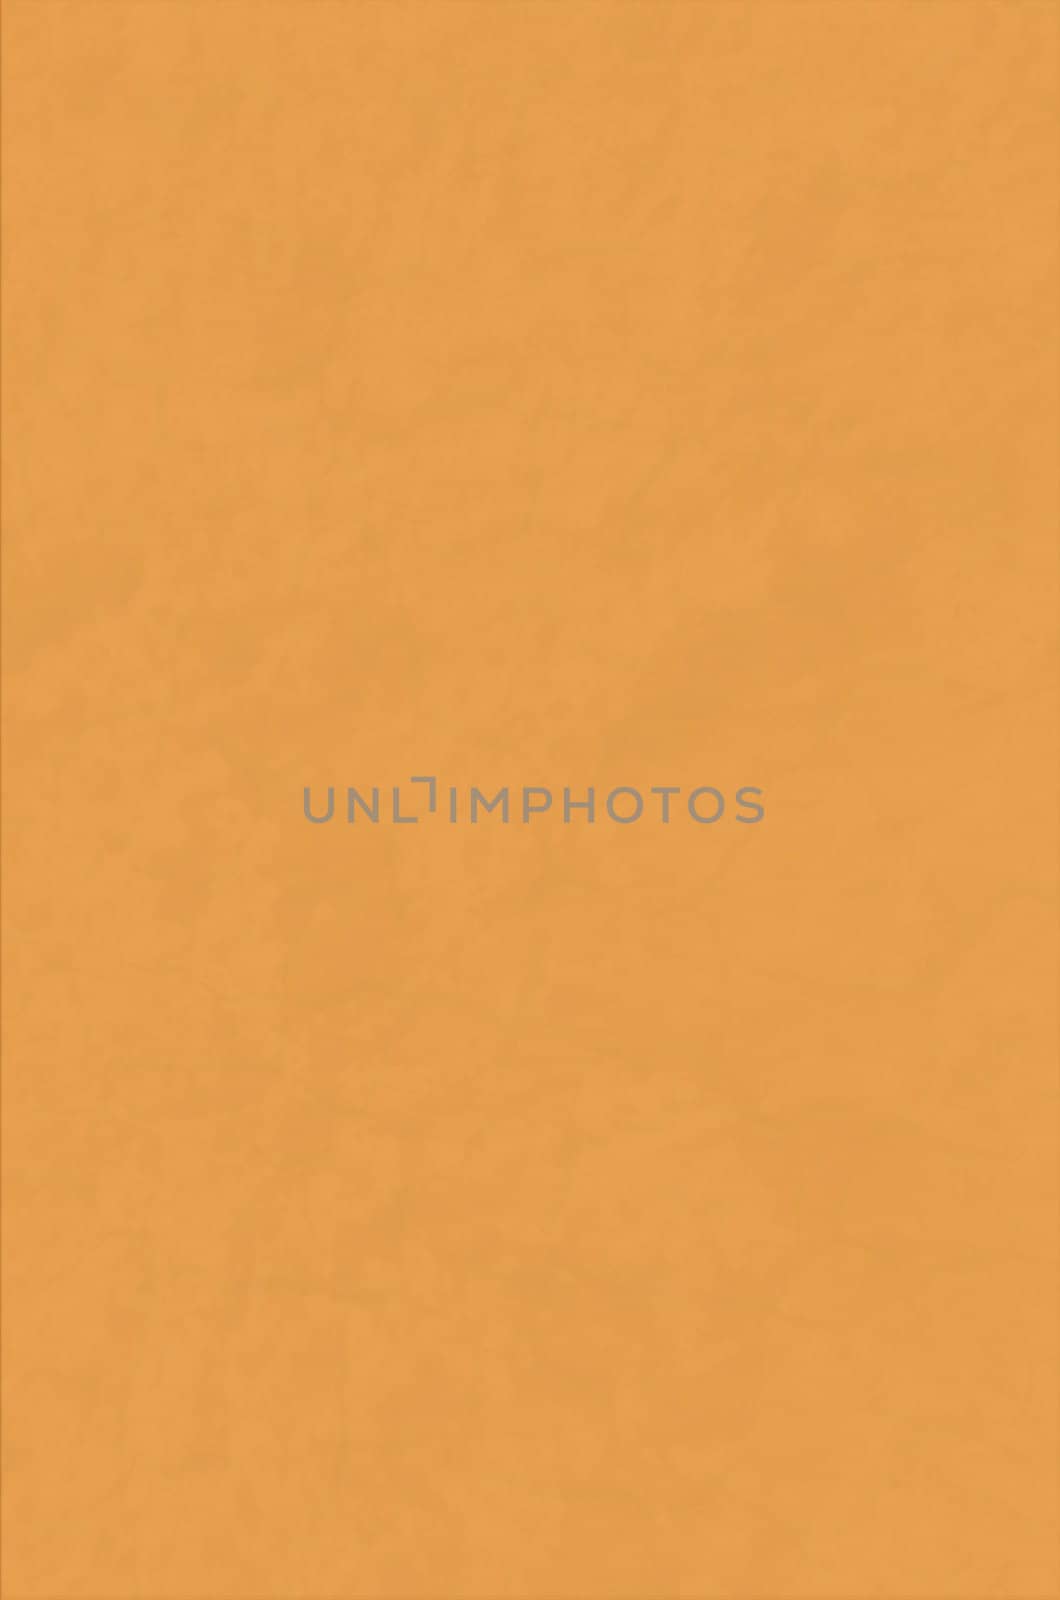 Abstract textured  light brown background